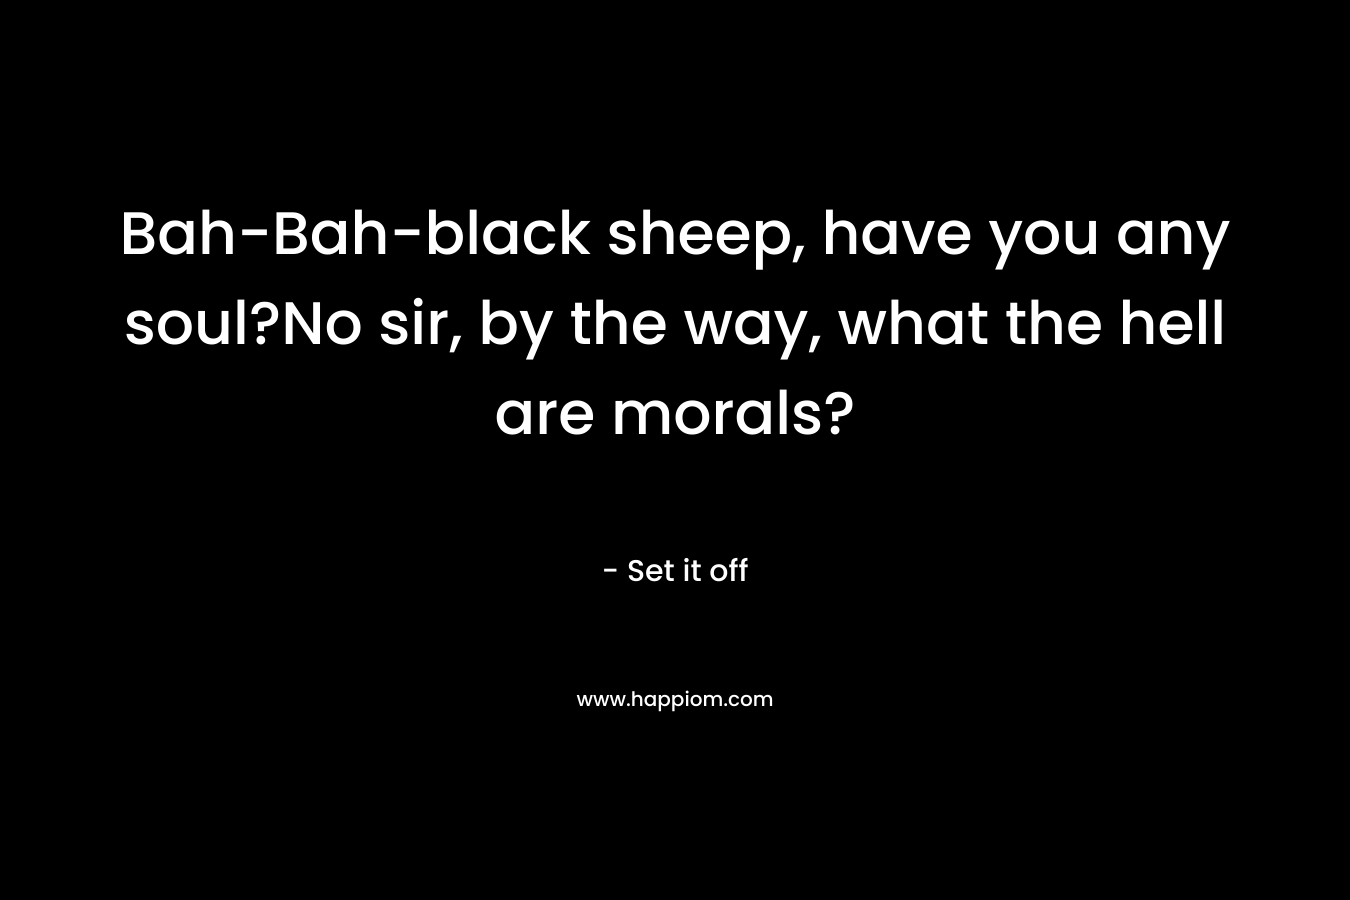 Bah-Bah-black sheep, have you any soul?No sir, by the way, what the hell are morals?